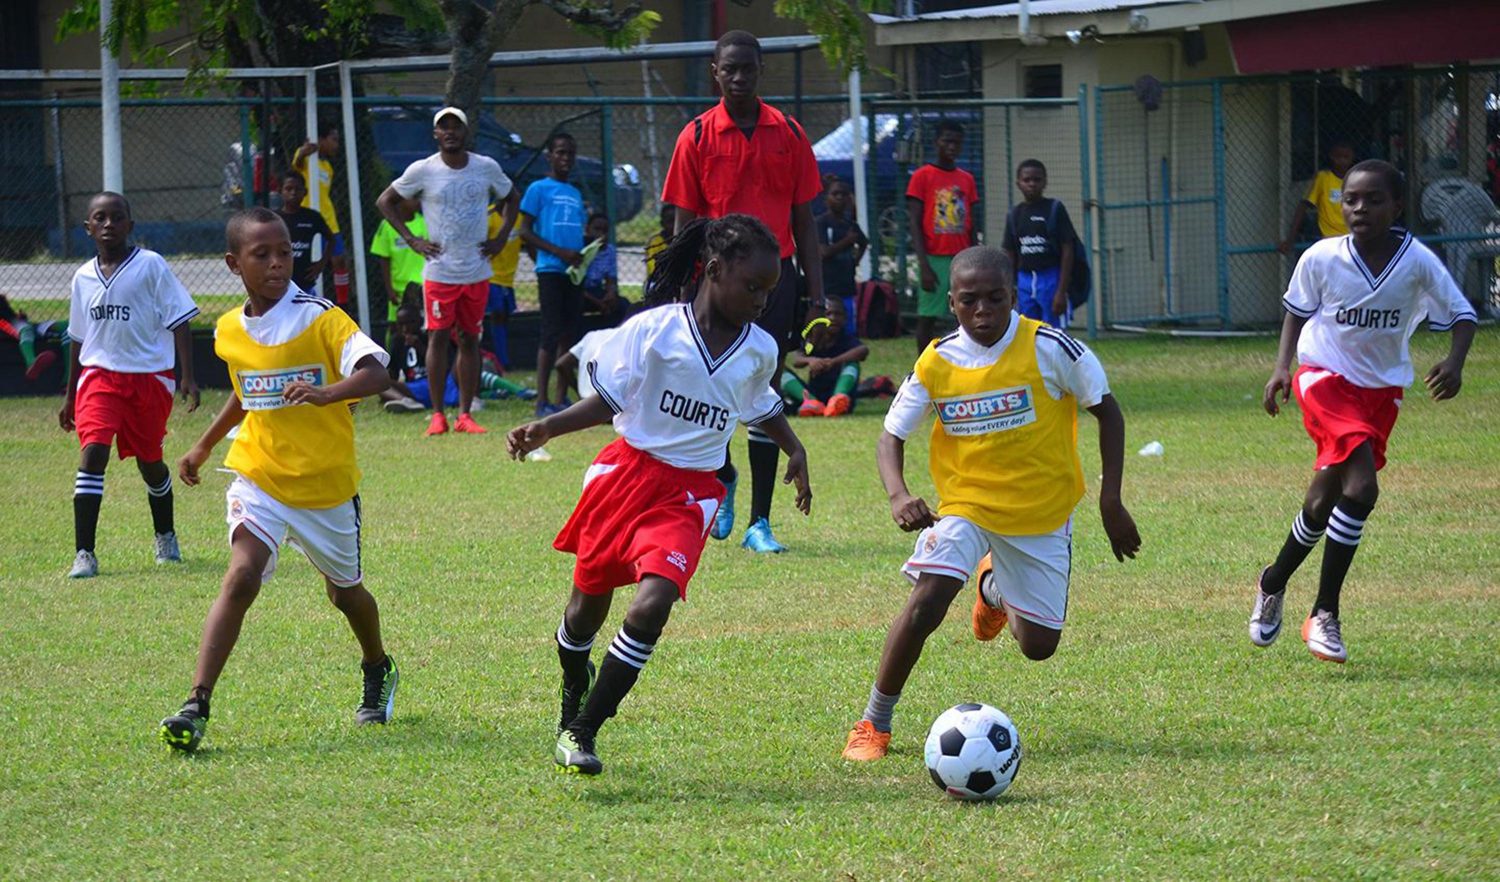 Players from Sophia (yellow) and two- time defending champion St. Angela’s battling for possession in the Courts Pee Wee Football Championship at the Thirst Park venue yesterday. (Orlando Vharles photo)
